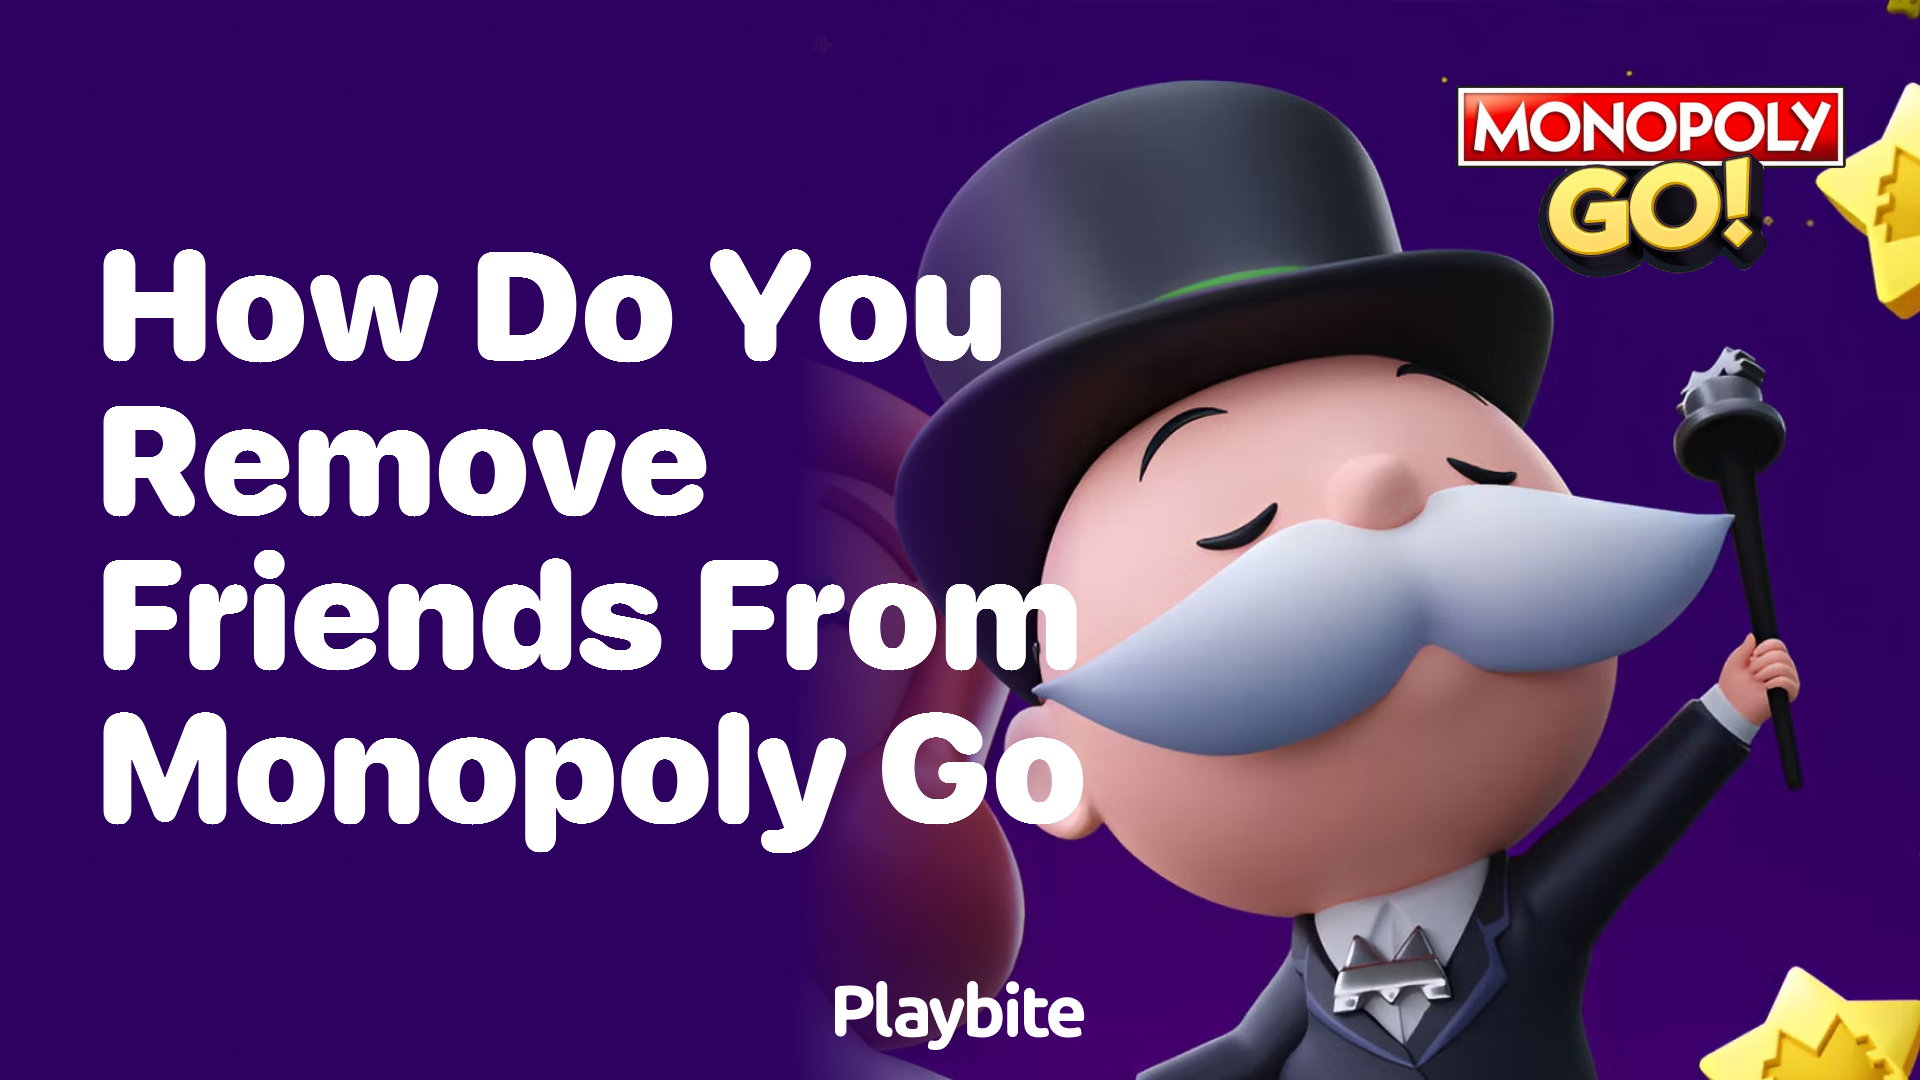 How Do You Remove Friends from Monopoly Go?